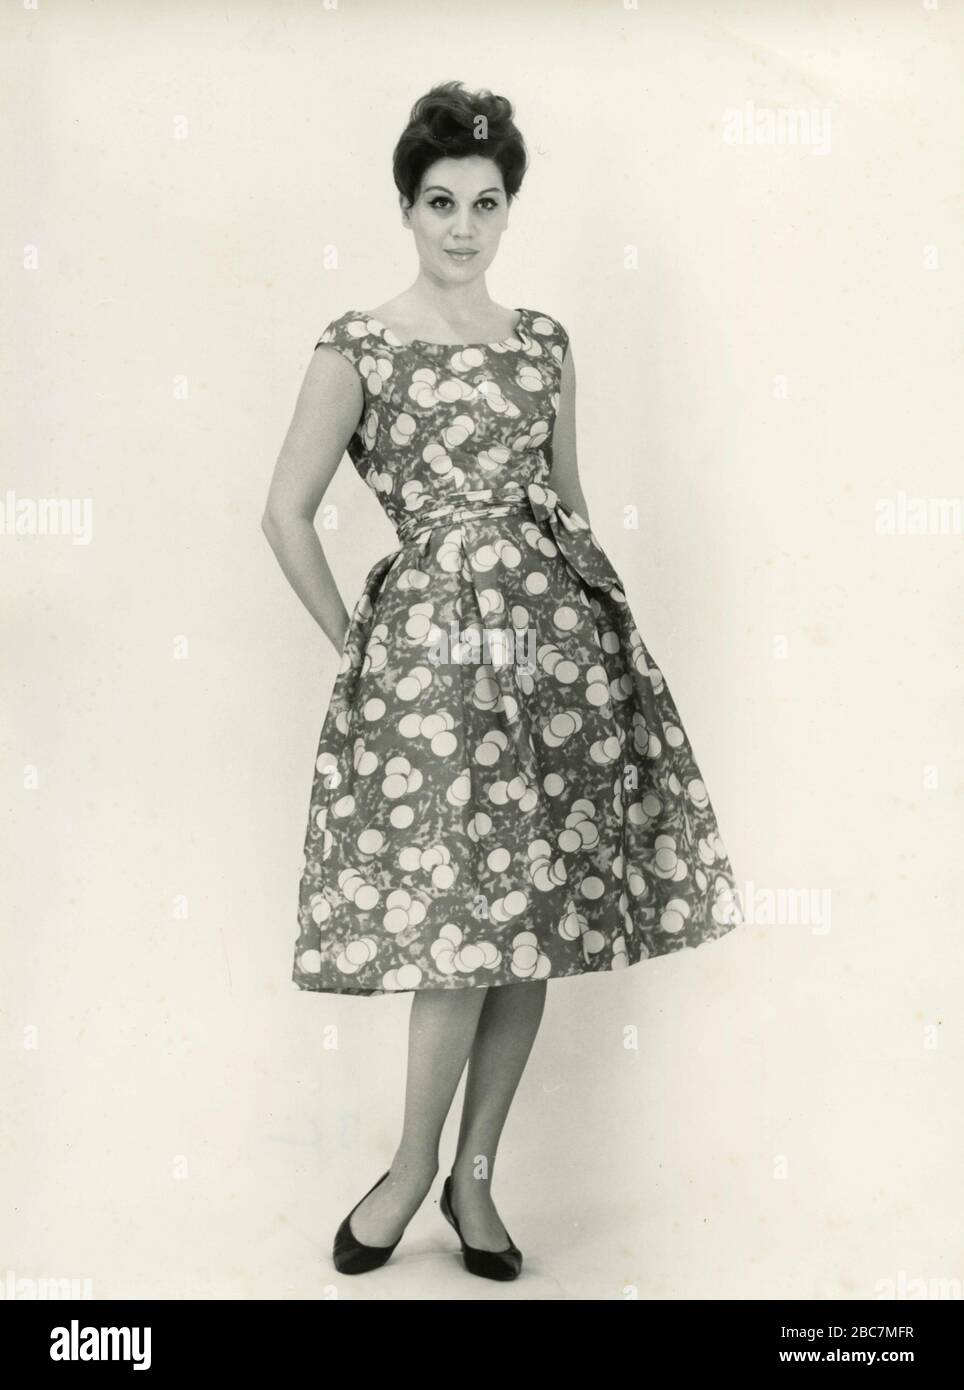 Model from the 1960s presenting an outfit with pattern bubble dress, Italy Stock Photo